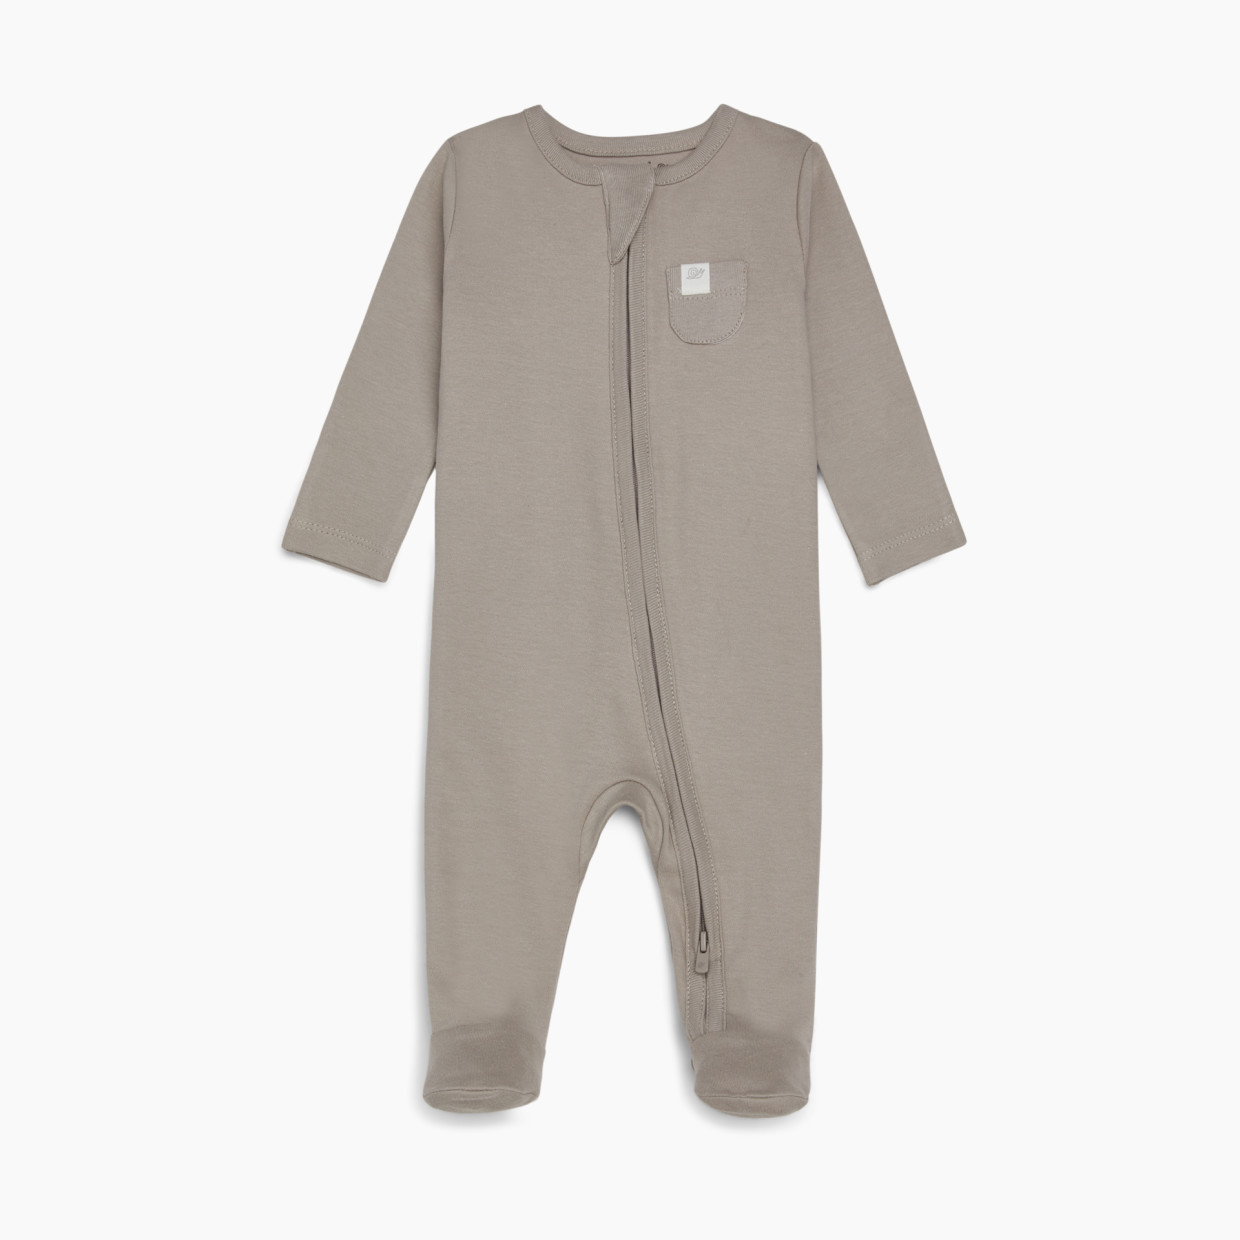 Tiny Kind Solid Zip Up Footie - Taupe, Nb.